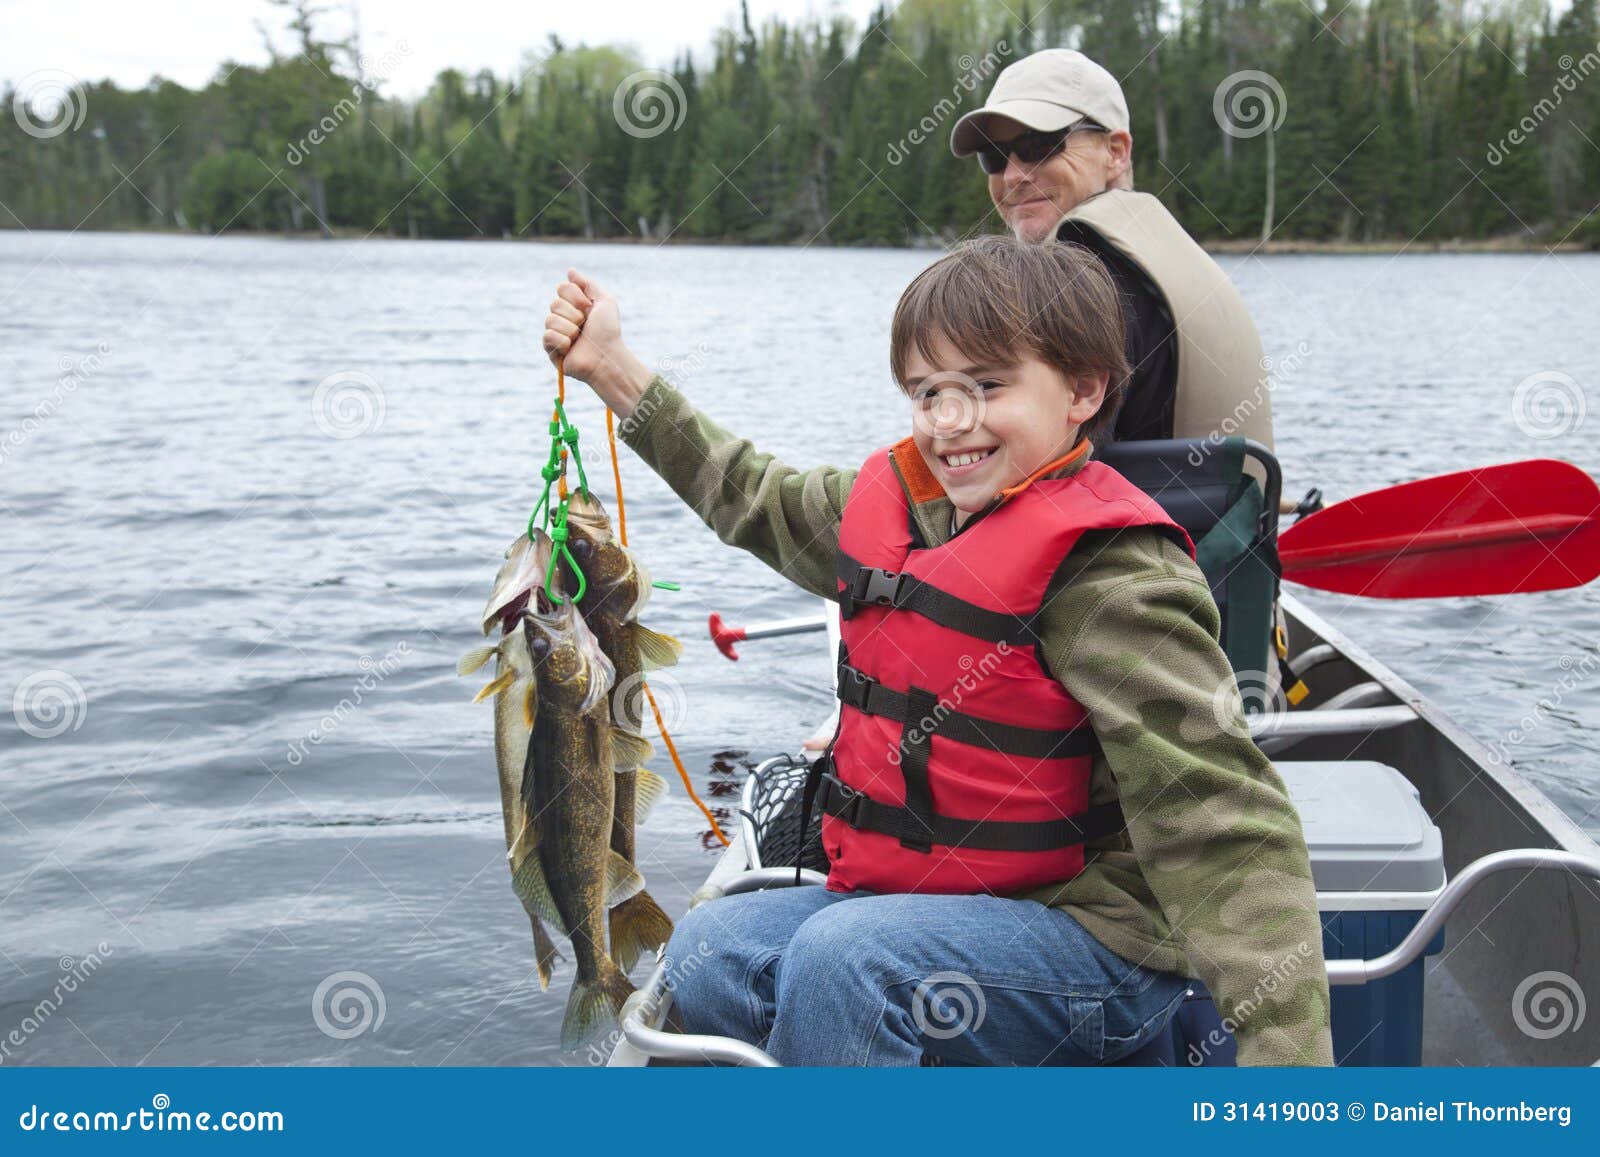 167 Fish Stringer Stock Photos - Free & Royalty-Free Stock Photos from  Dreamstime